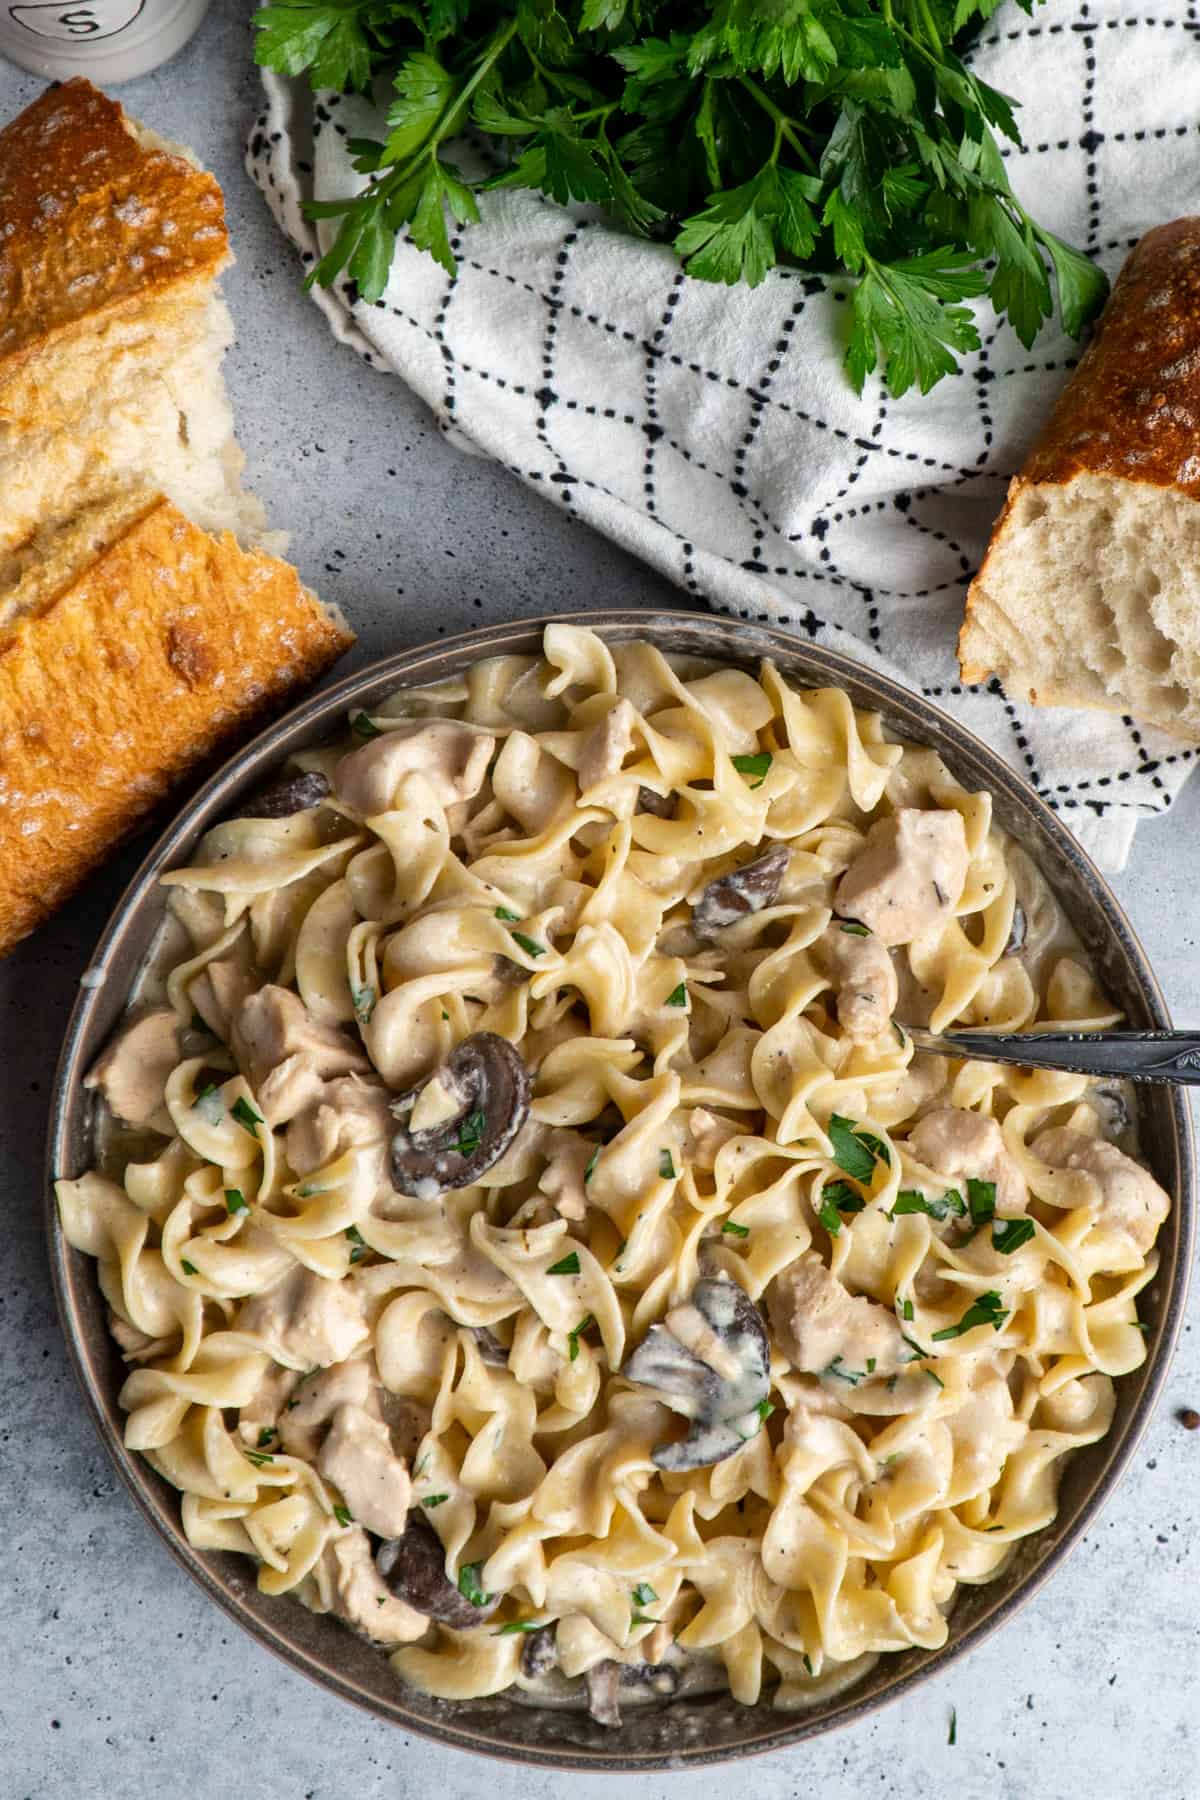 Slow cooker chicken stroganoff in a gray bowl and bread and parsley in the background.